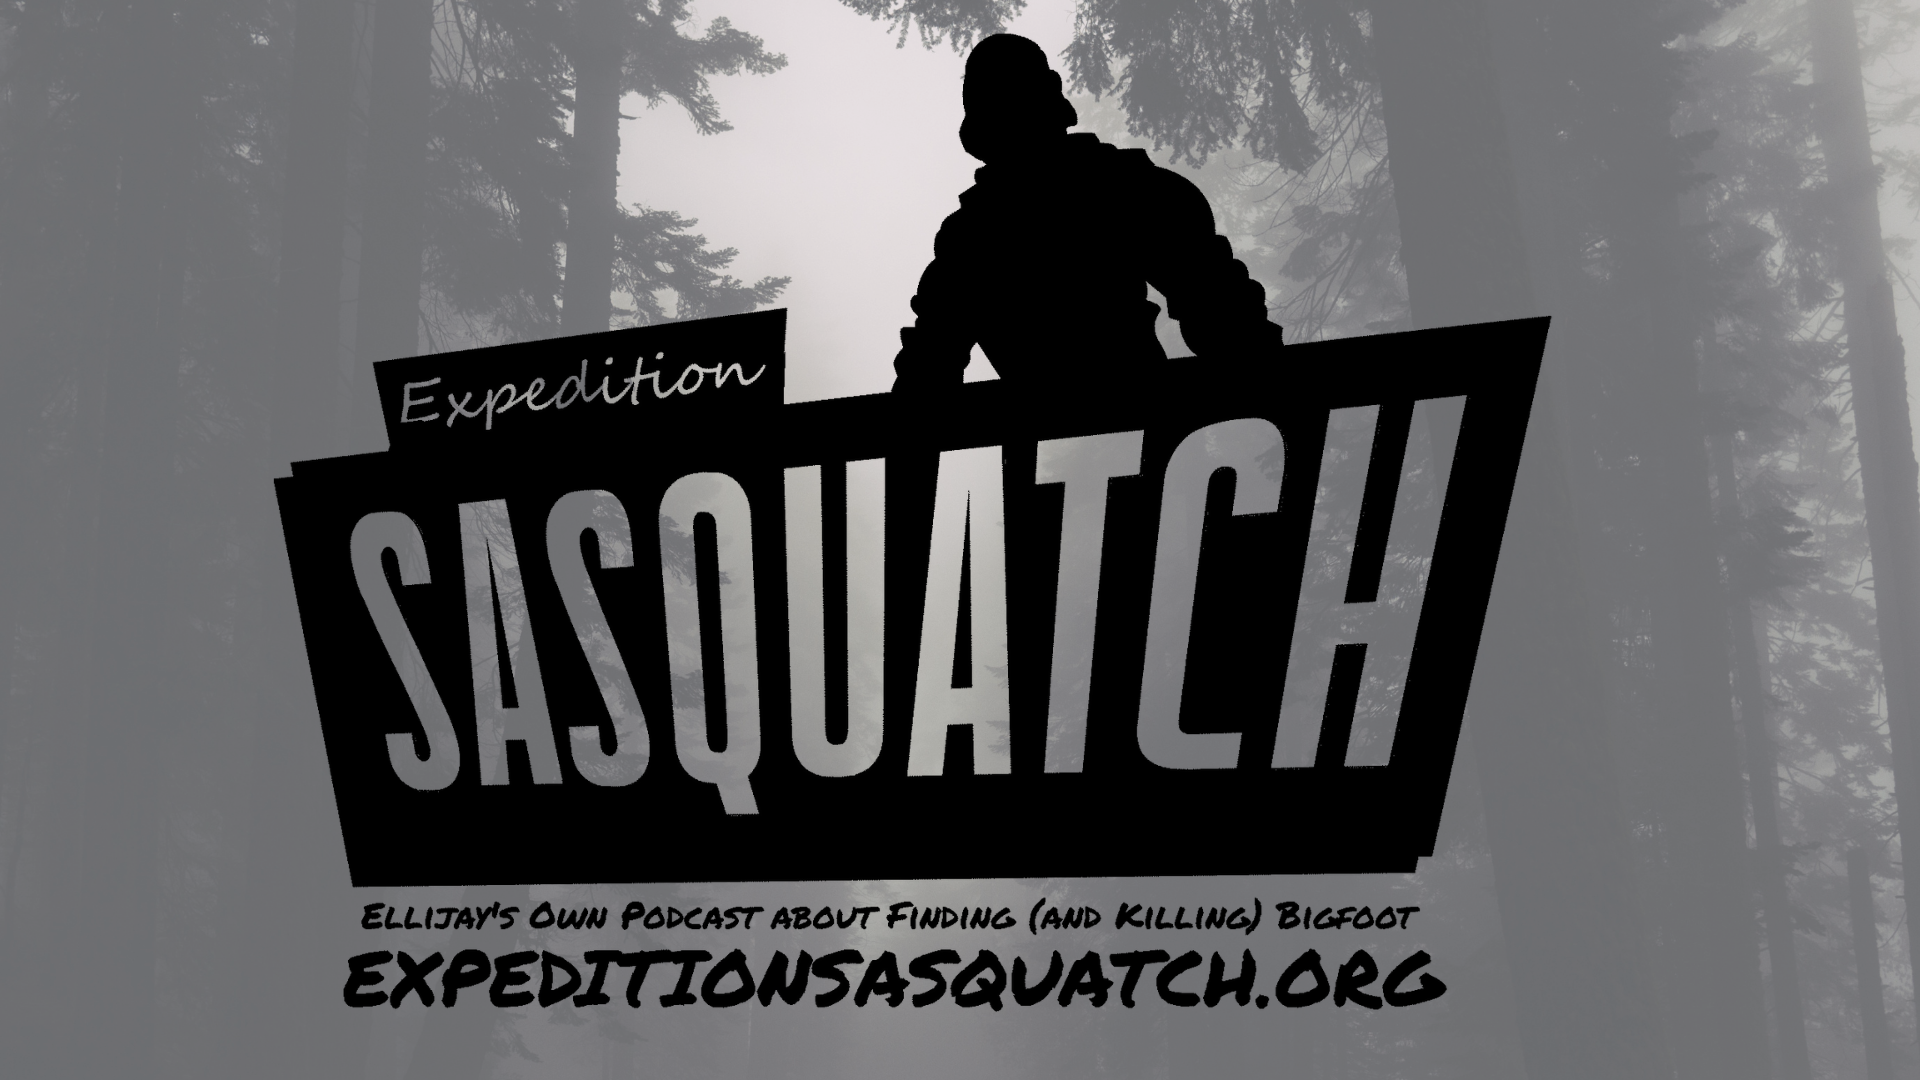 Expedition Sasquatch logo with a gray background and black text